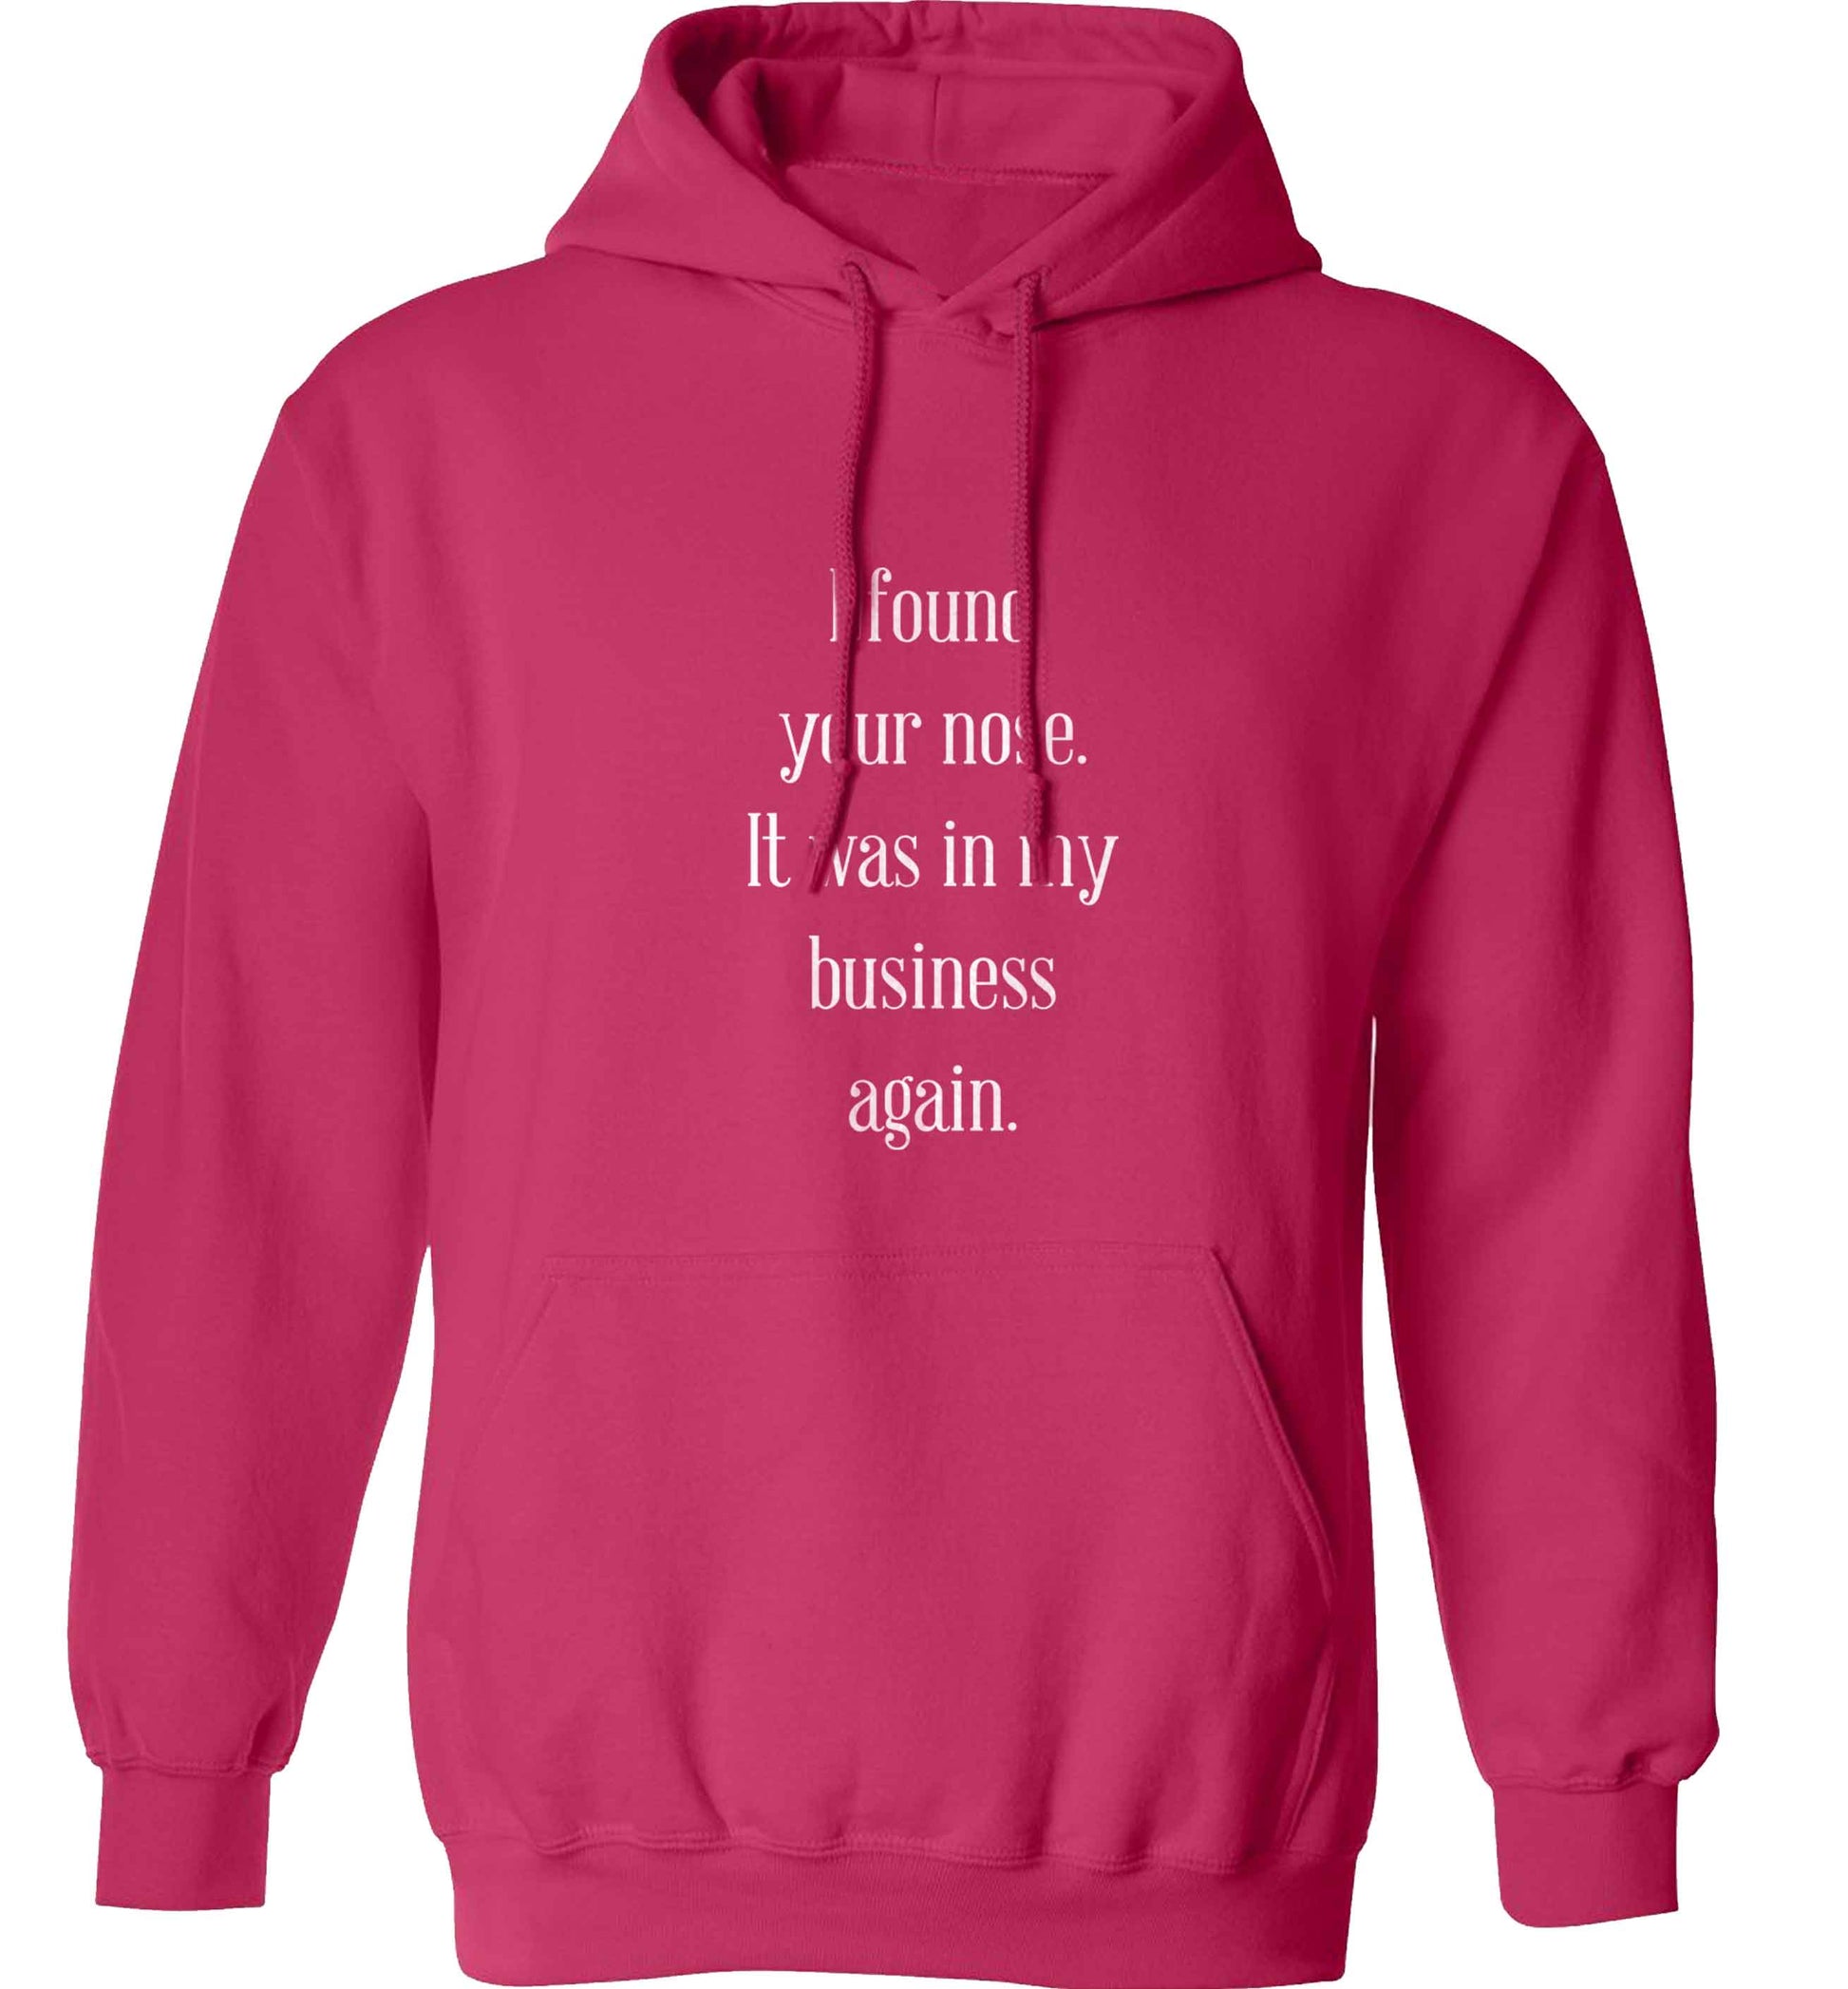 I found your nose it was in my business again adults unisex pink hoodie 2XL